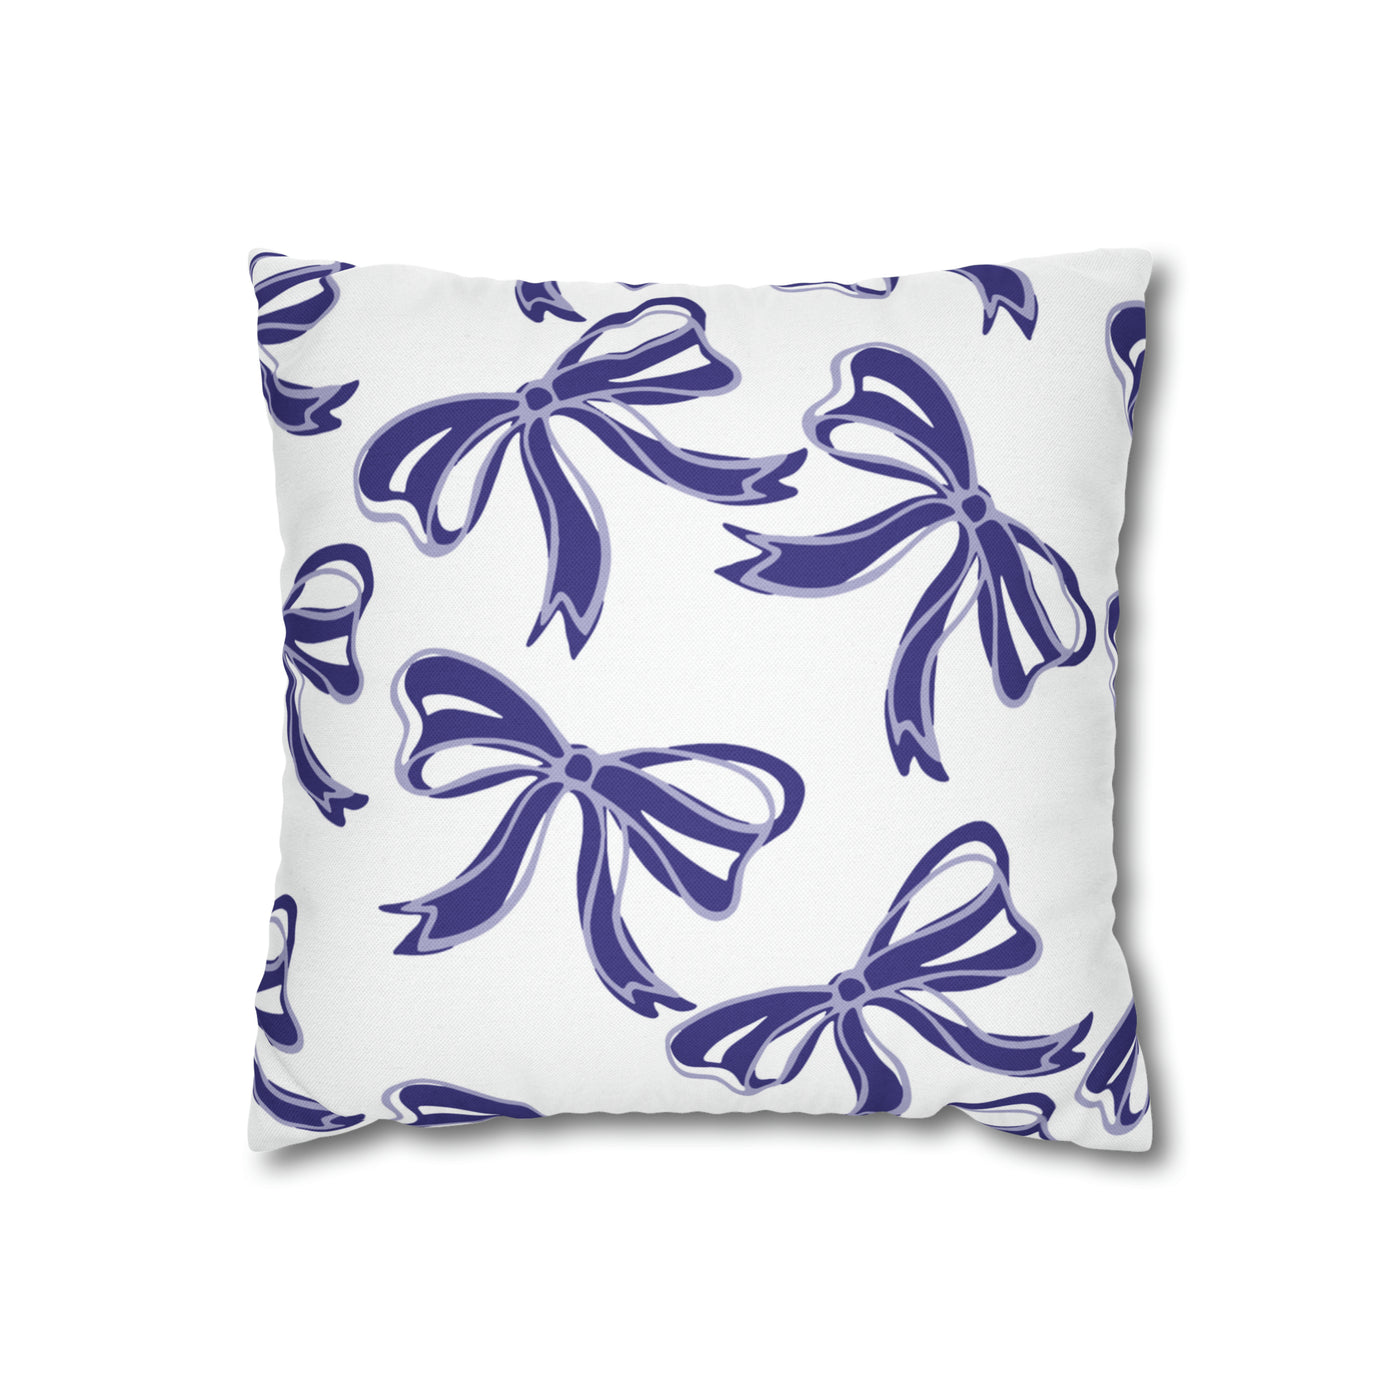 Trendy Bow College Pillow Cover - Dorm Pillow, Graduation Gift, Bed Party Gift, Acceptance Gift, College Gift, Northwestern, High Point